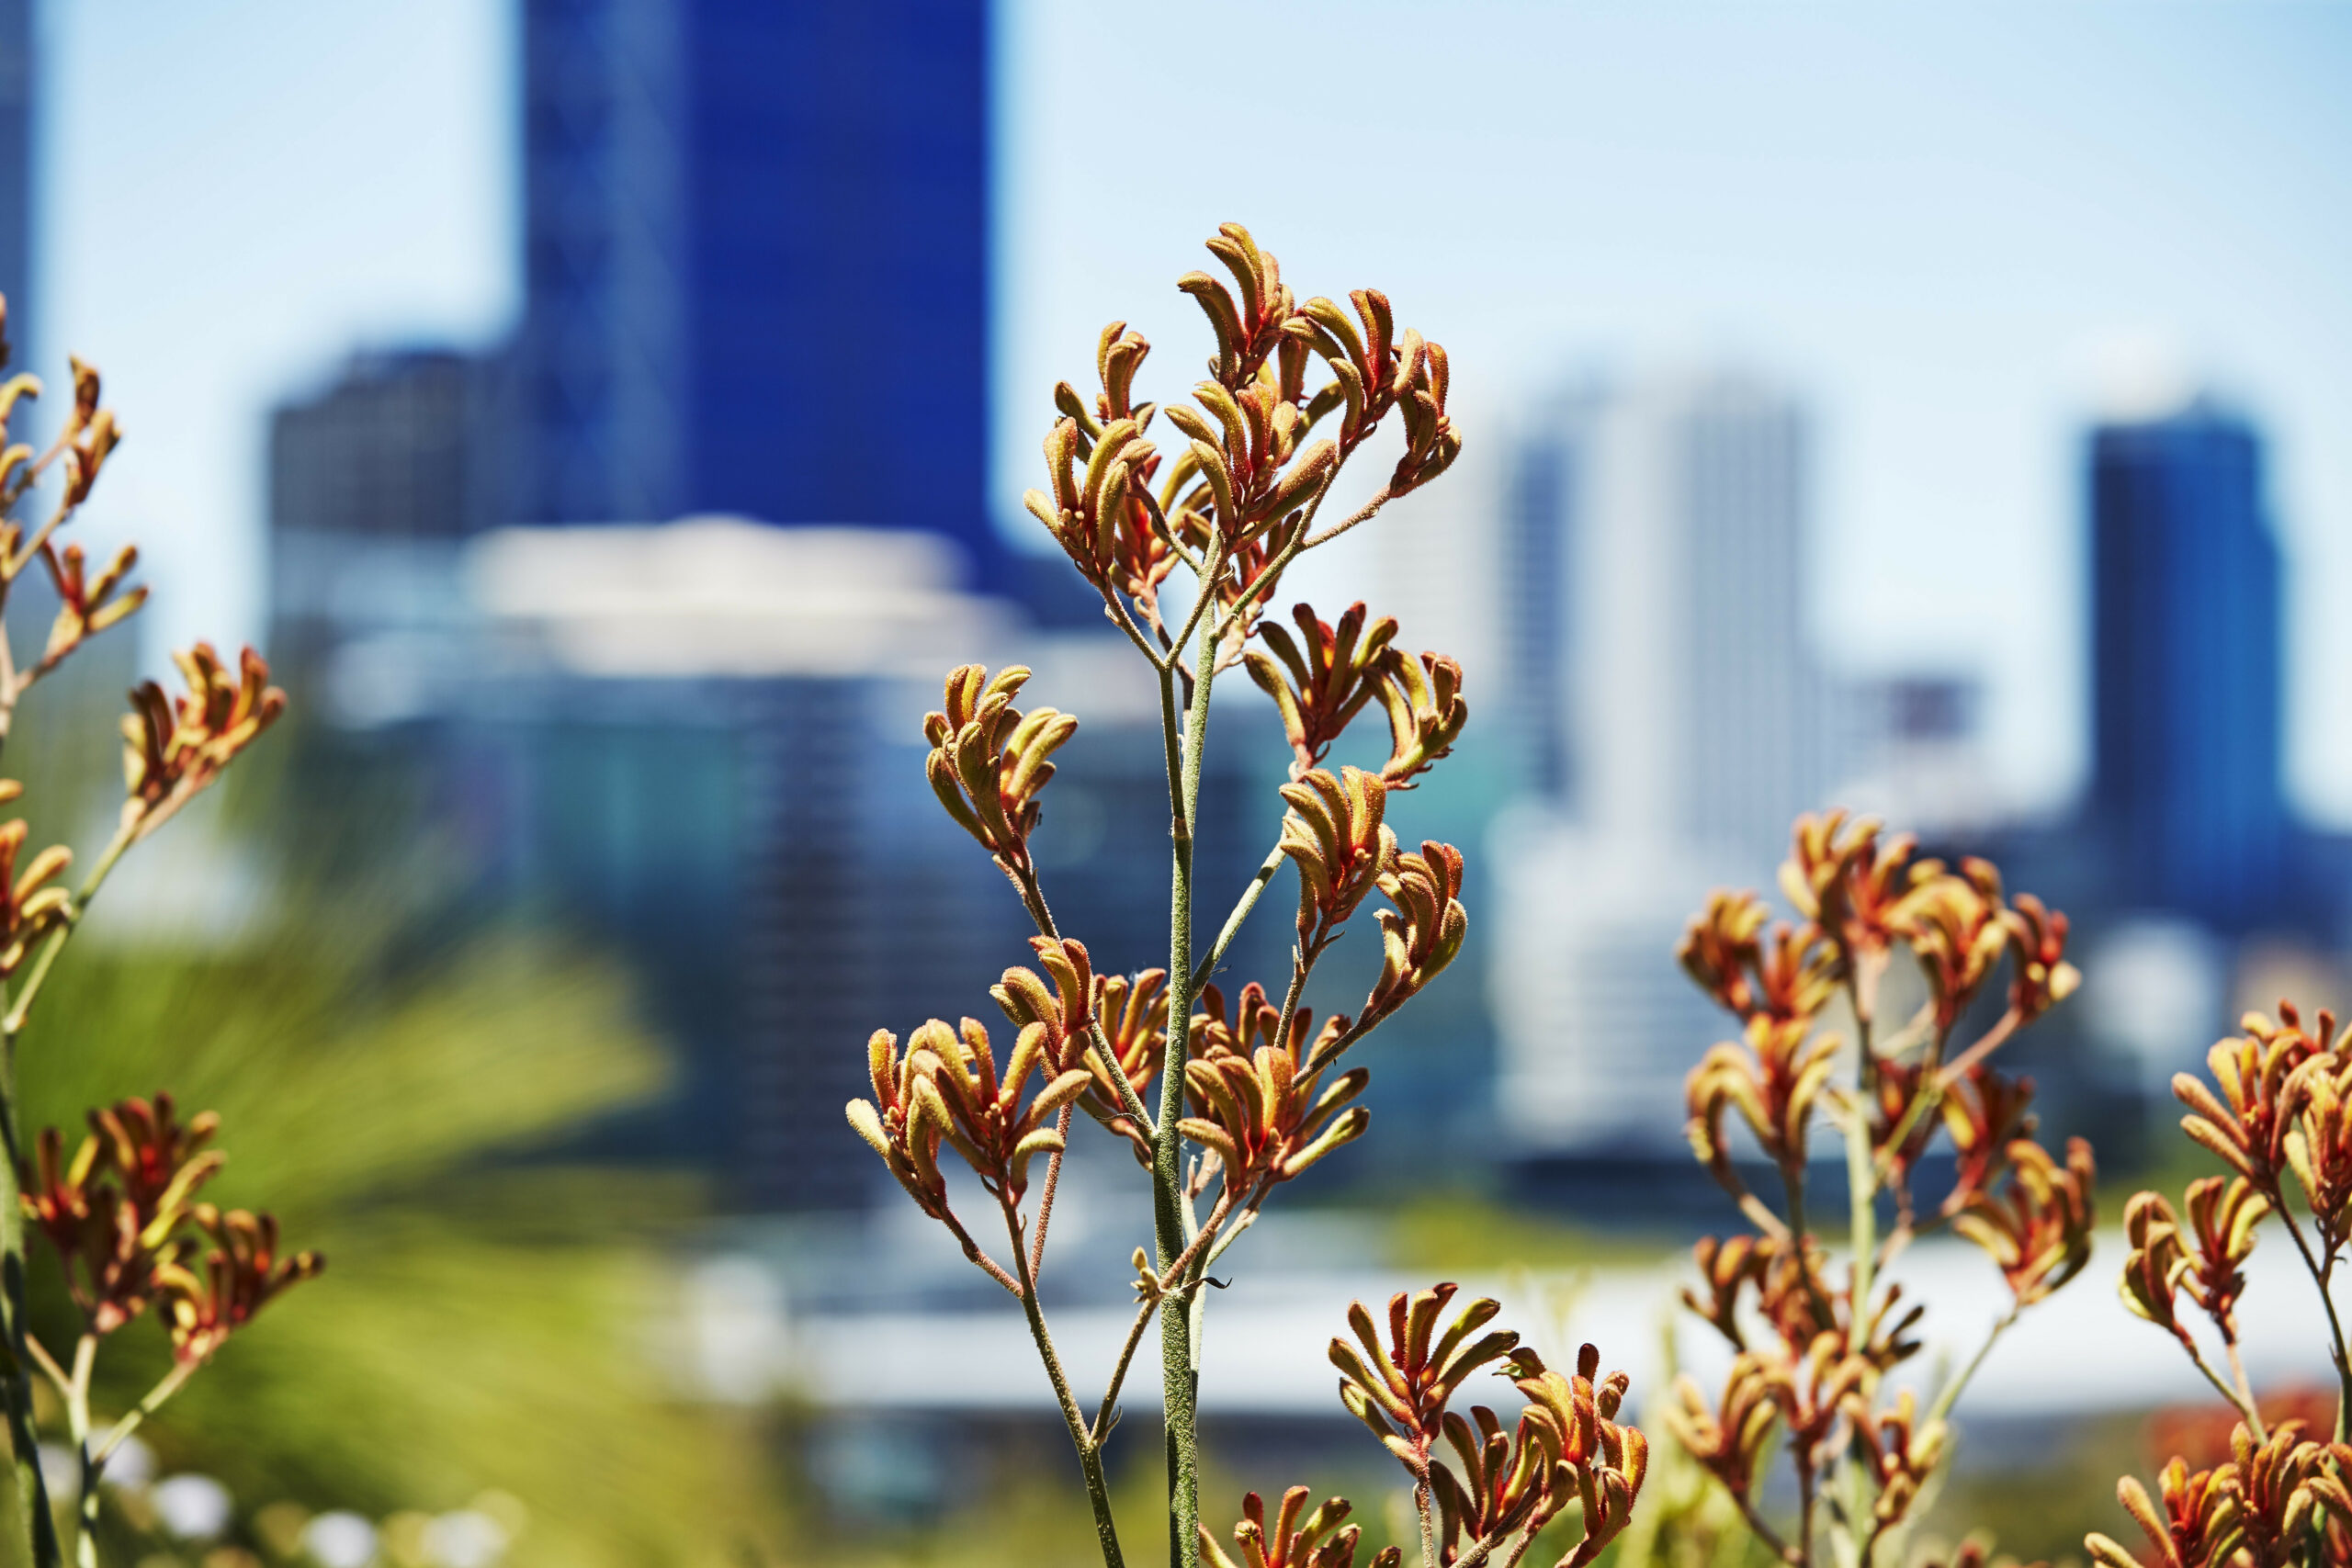 This is a photo of a kangaroo paw. The stems of the plant are green in colour, with orange/red coloured flowers. The background of the photo is blurred and shows green plants and buildings in the city.